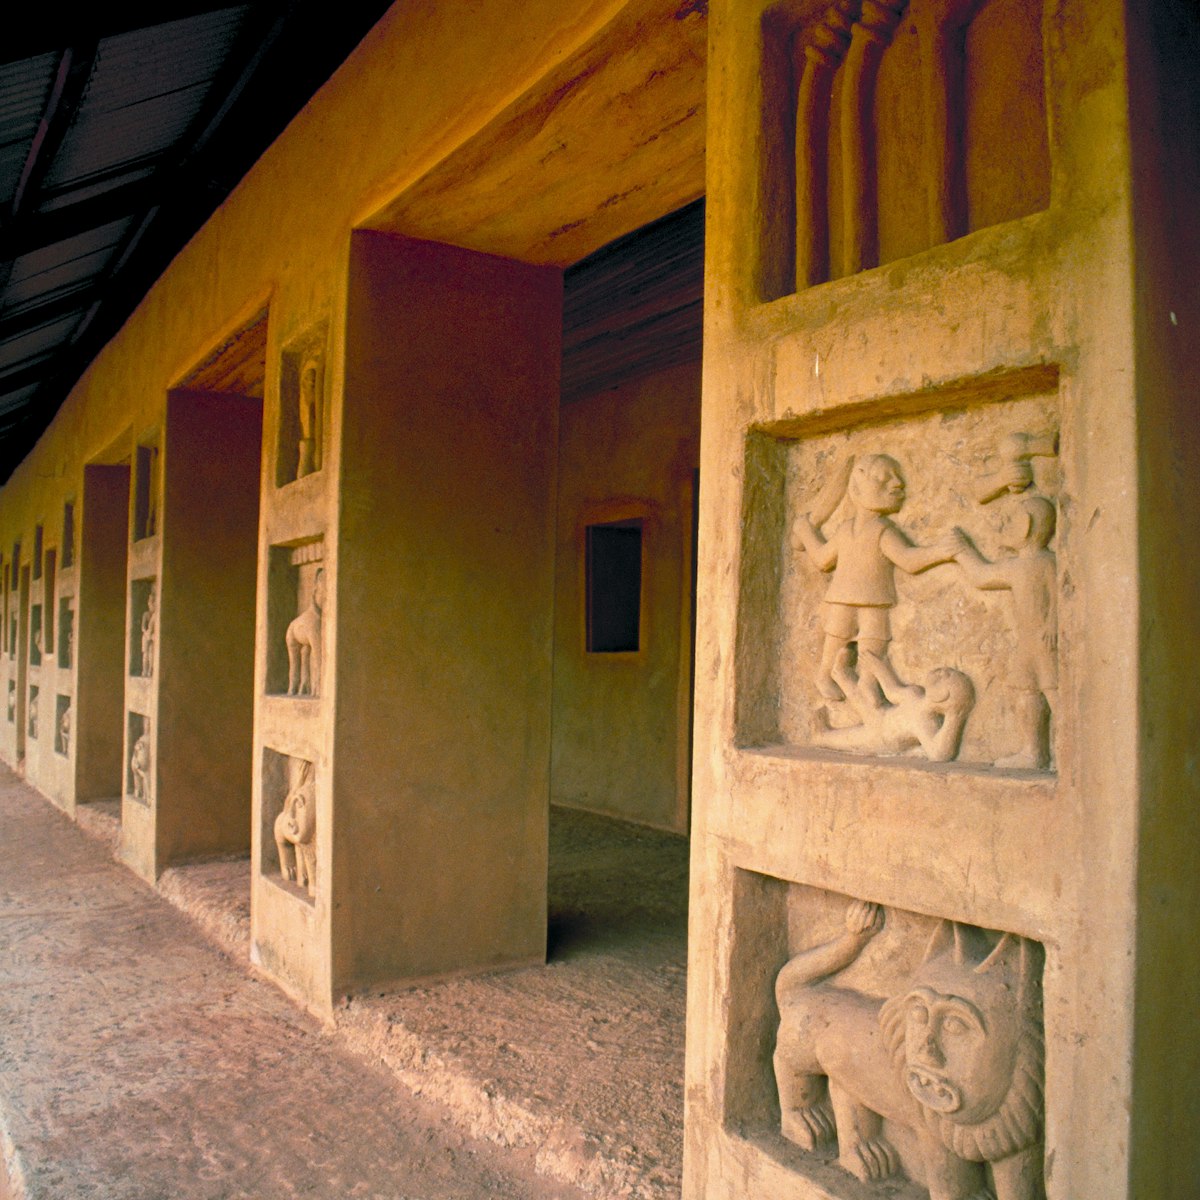 The Royal Palace Museum of the Fon dynasty kings of the Dahomey Empire. The Museum is a UNESCO World Heritage Site. Abomey, Benin. West Africa. (Photo by: Education Images/UIG via Getty Images)